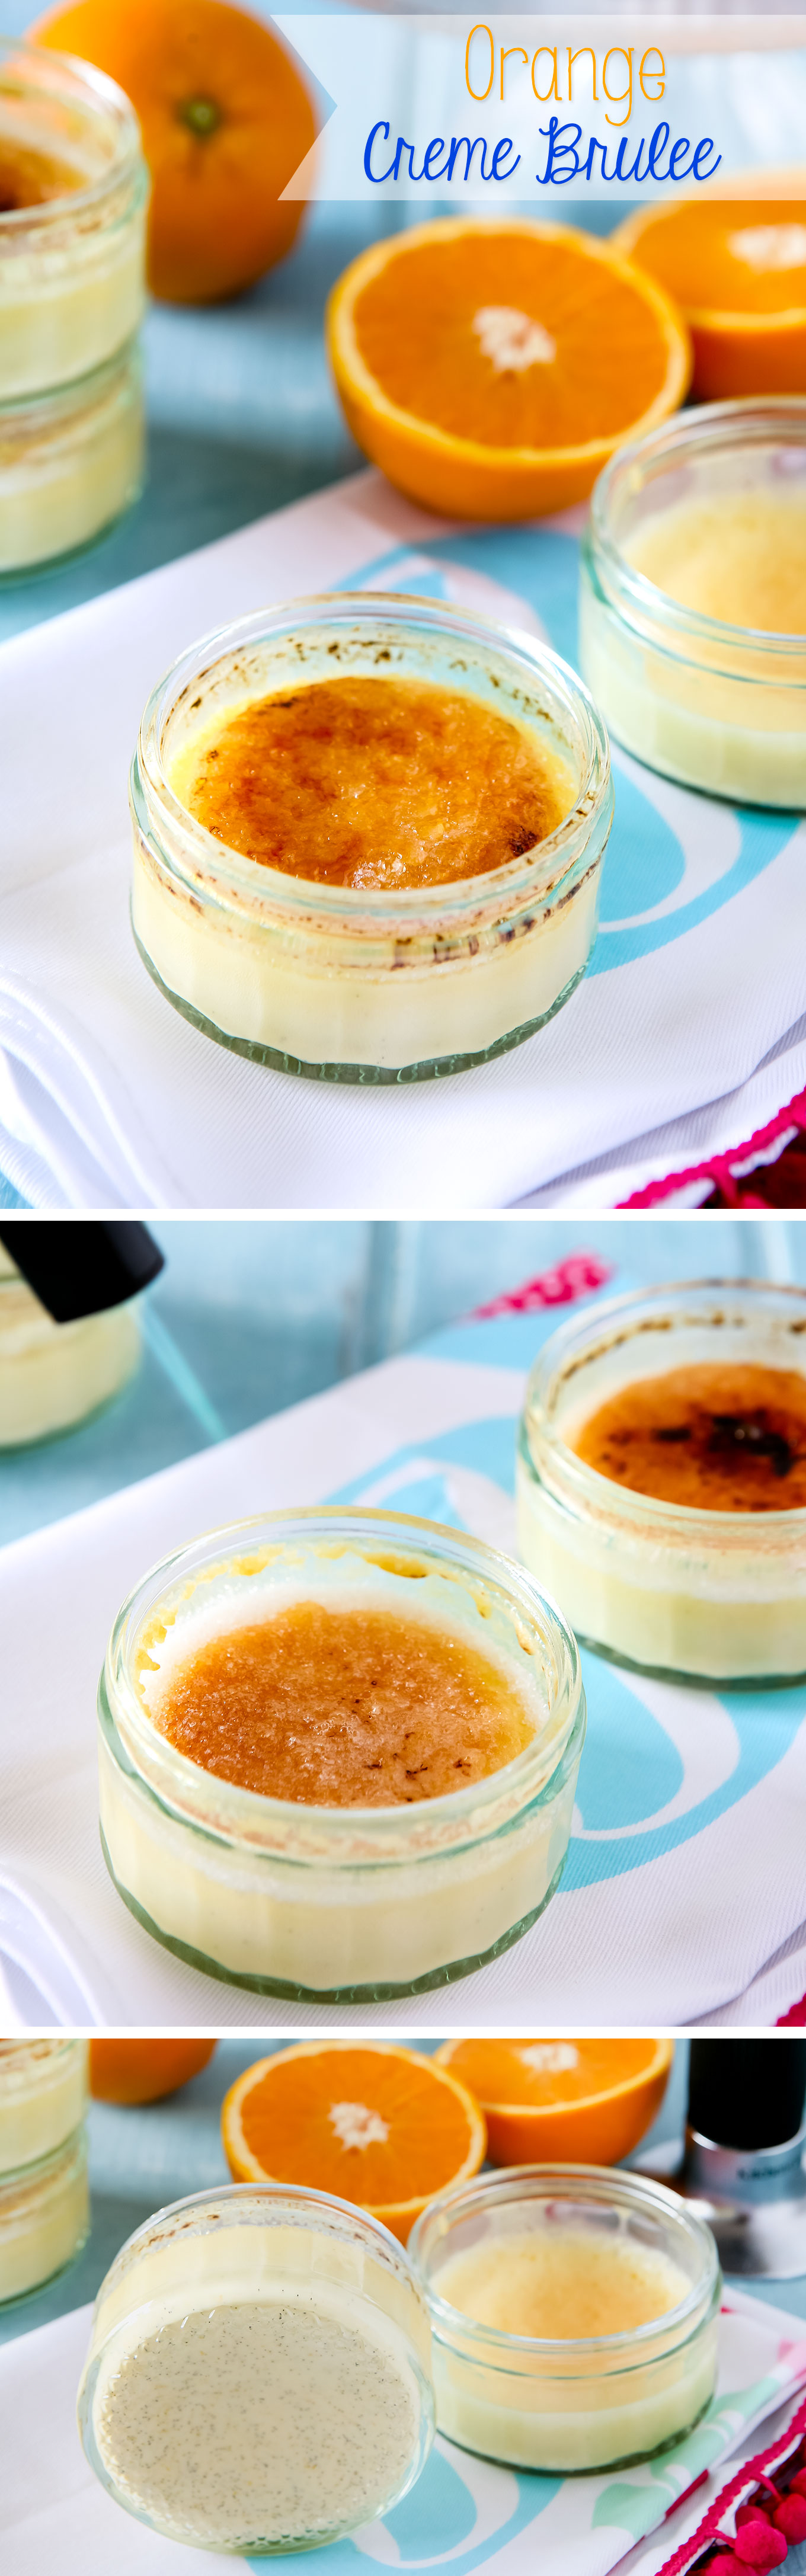 Orange Creme Brûlée Recipe by Sweet2EatBaking.com | Fresh, rich and delicious. Made with double (heavy) cream, fresh orange juice, and scraped seeds of a vanilla pod, not forgetting that crisp caramel topping make this dessert a surefire winner!